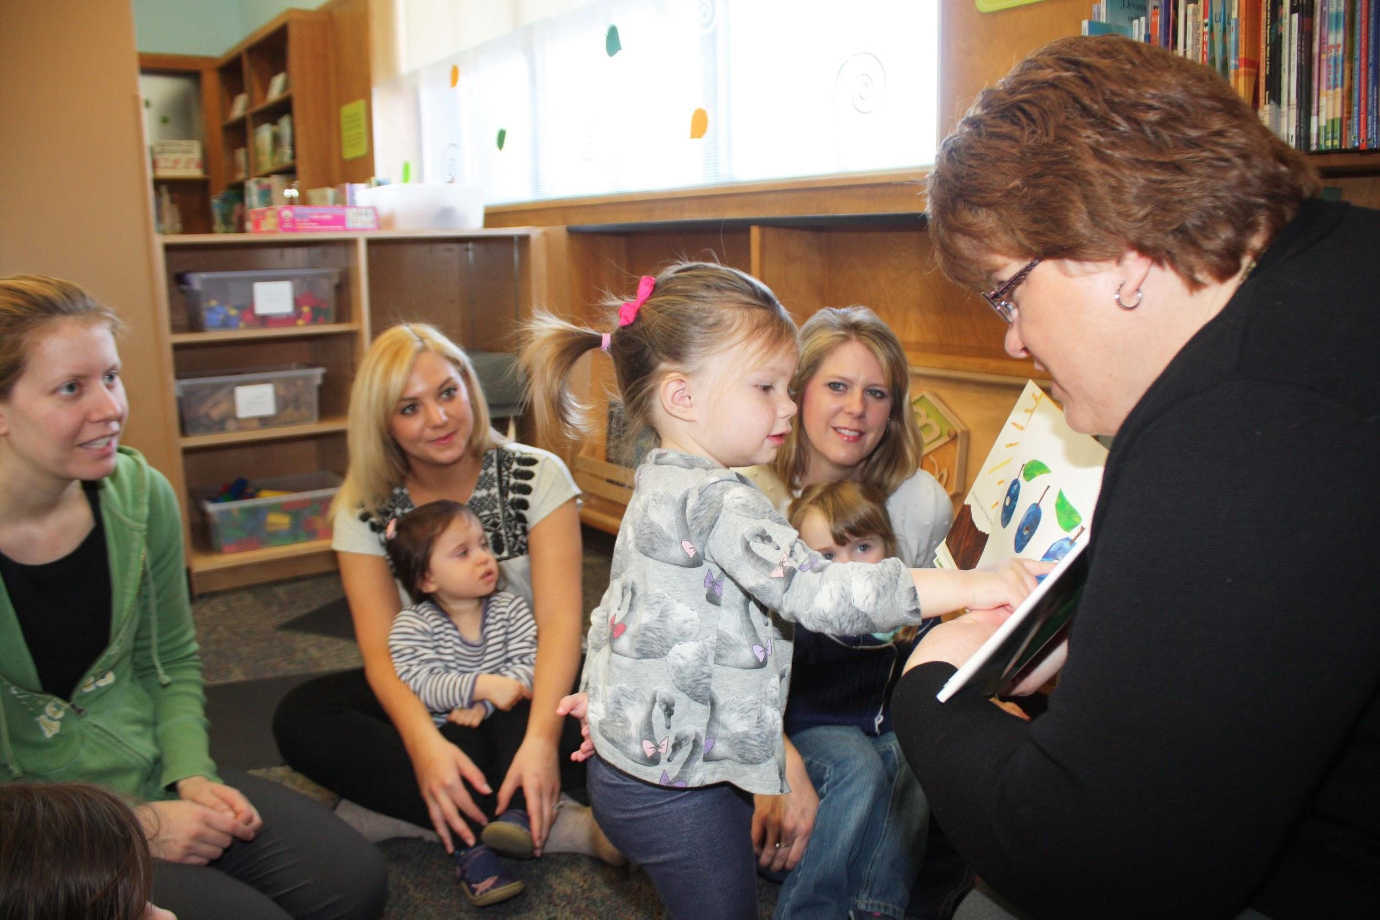 The Providence Public Library’s early childhood literacy programs are among its most popular. Image courtesy of the Providence Public Library.